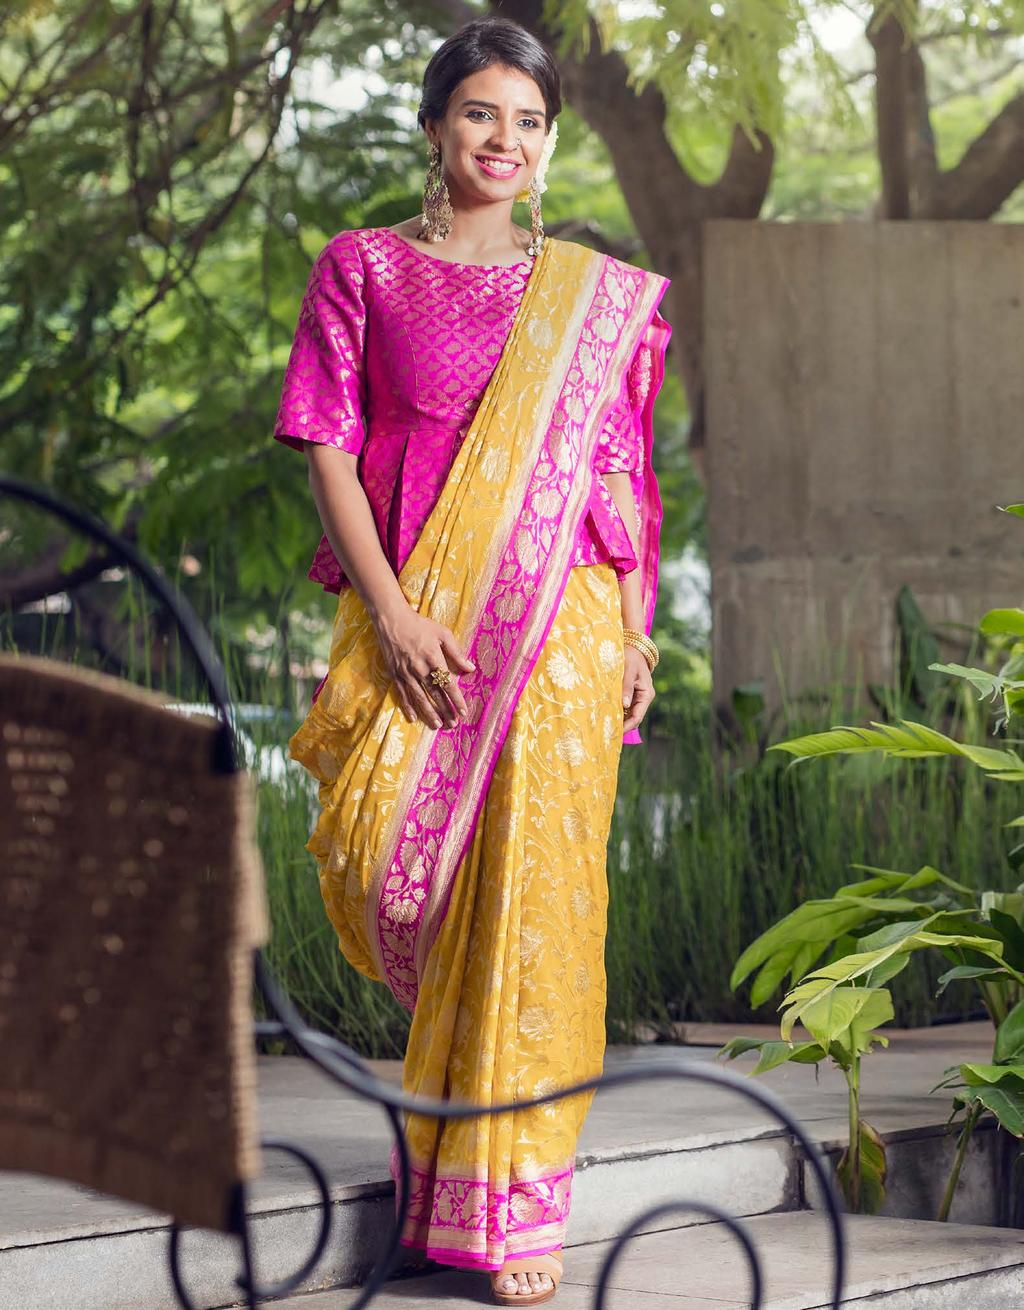 10 r Floating Shimmer My top choice of fabric is georgette and this handloom Banarasi georgette